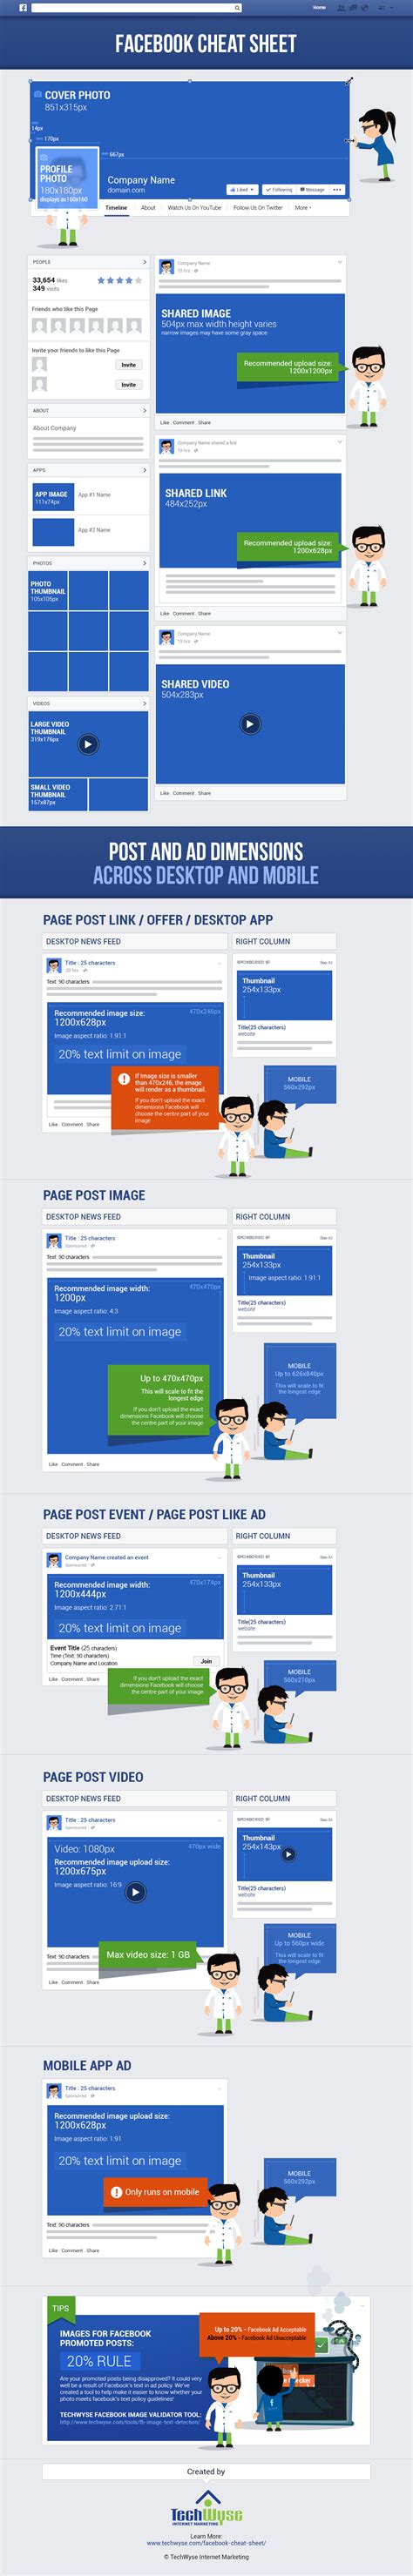 Facebook Cheat Sheet All Image Sizes Dimensions And T